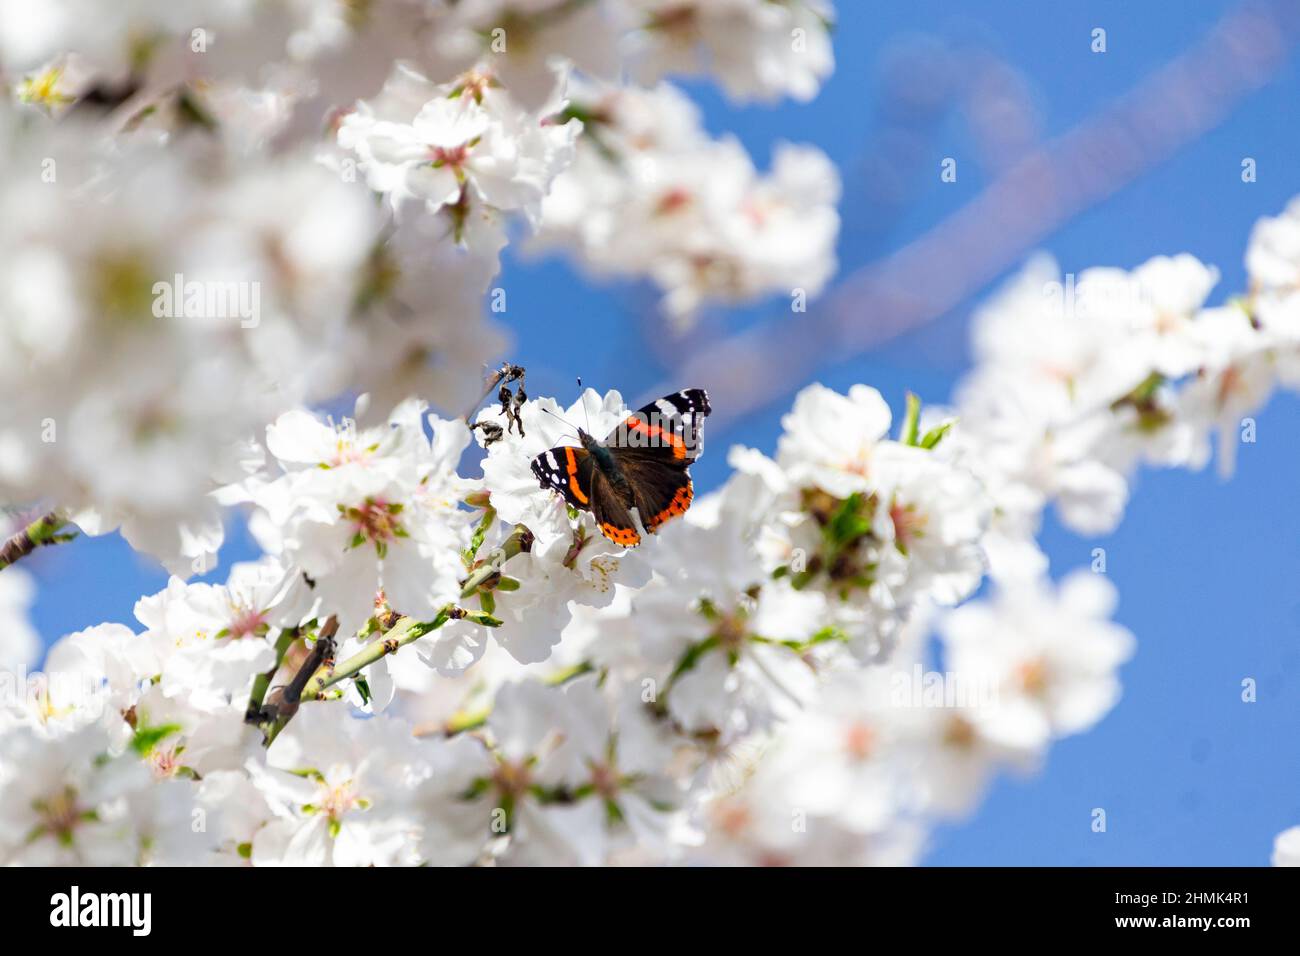 Butterfly on flowers. Atalanta butterfly (Vanessa atalanta) on the white flowers of almond trees in El Retiro Park in Madrid, in Spain. Blue sky. Stock Photo